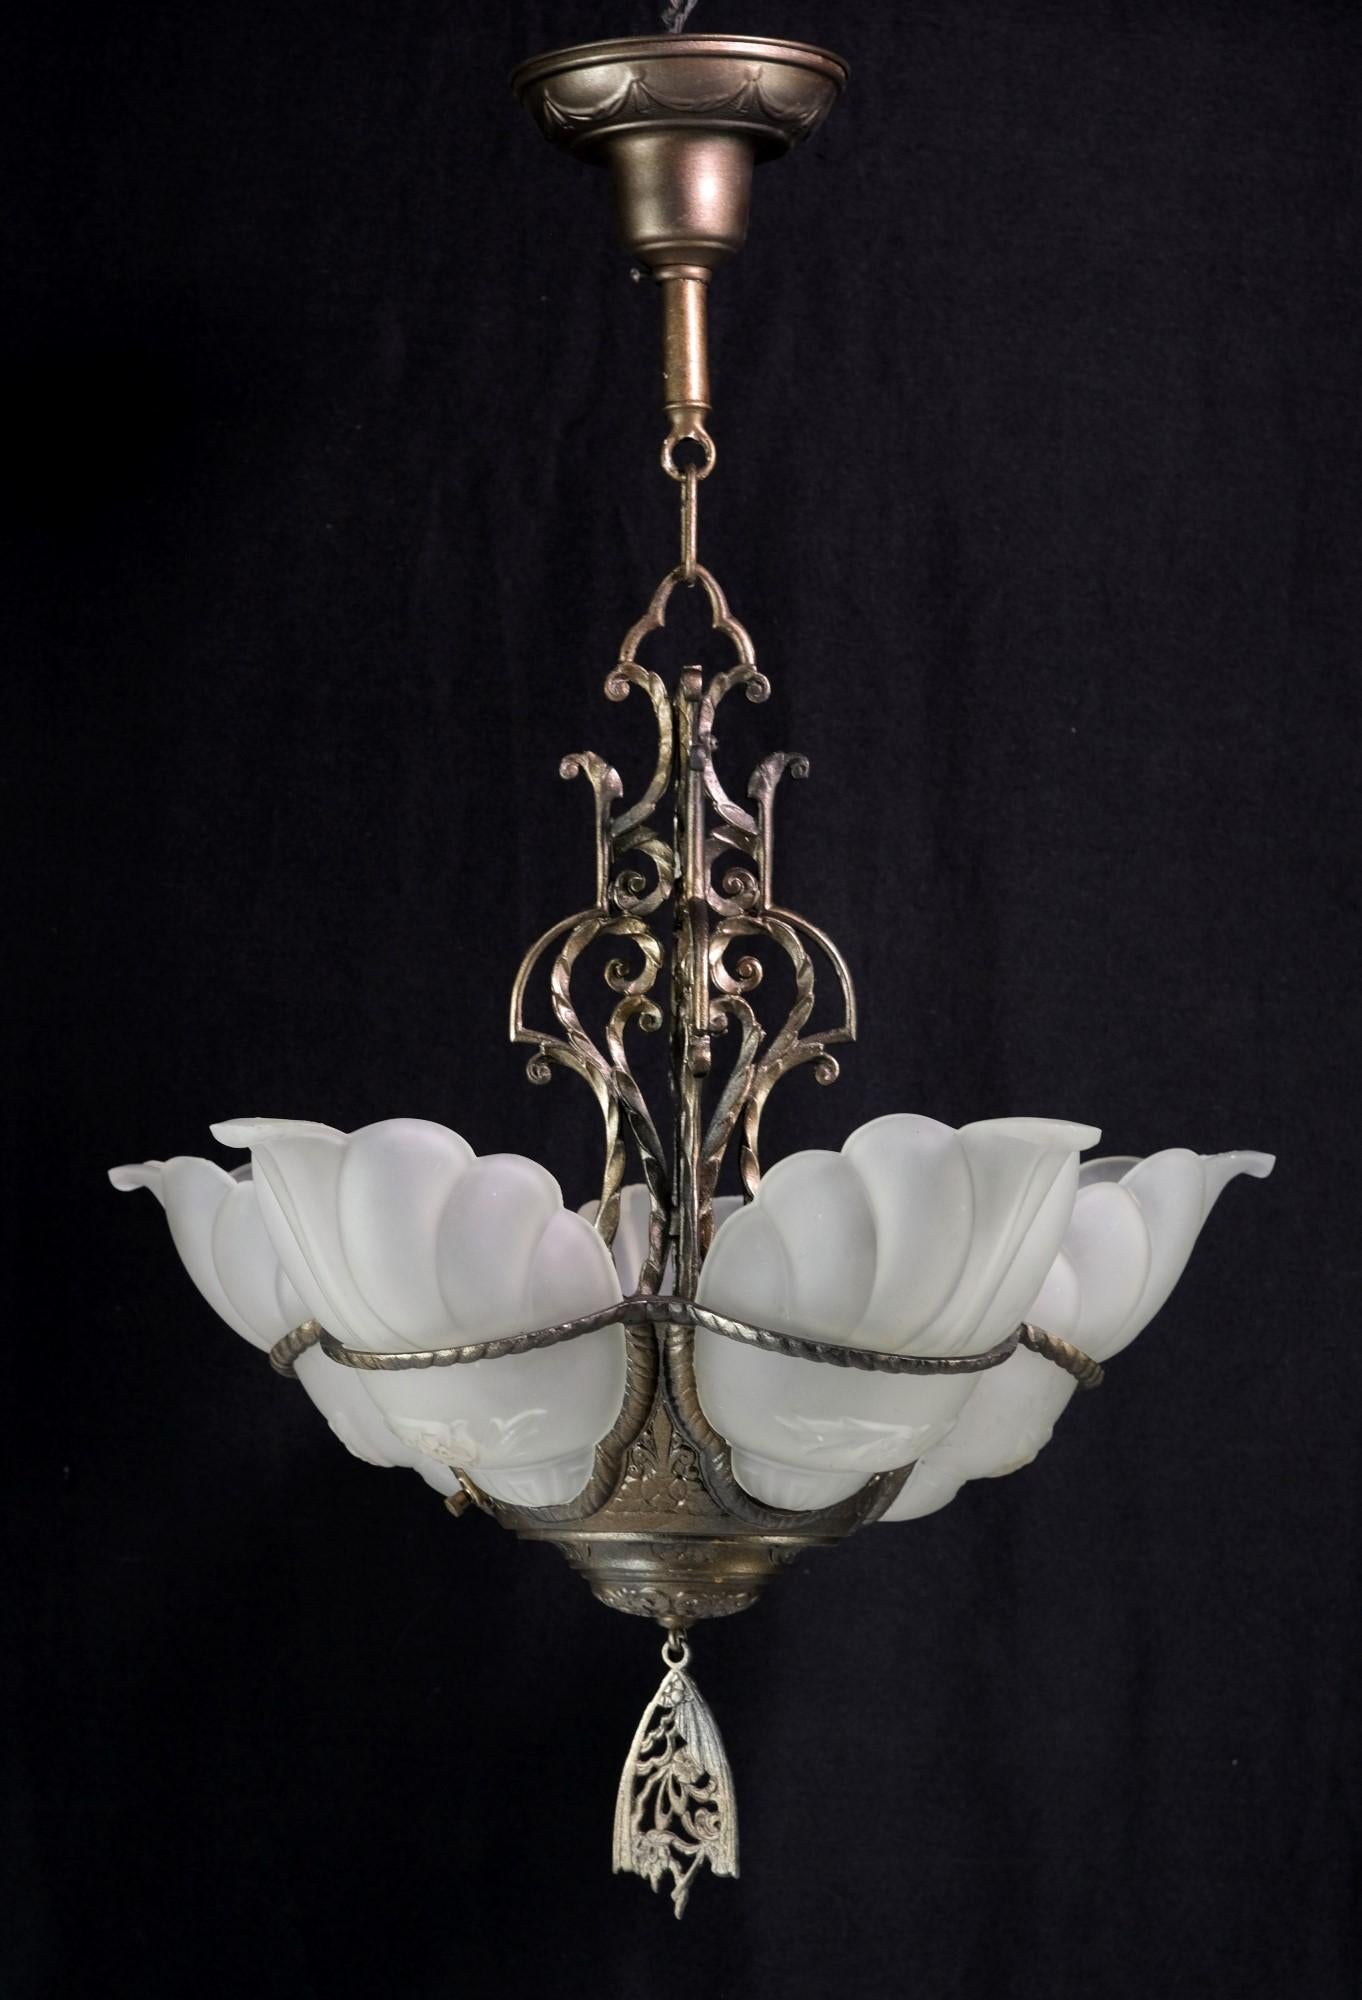 Antique 5 light bronze chandelier with slip shades in the Devon series style. This Art Deco Chandelier has floral details, with the shades consisting of frosted white glass in a floral design. The price includes restoration. This can be seen at our